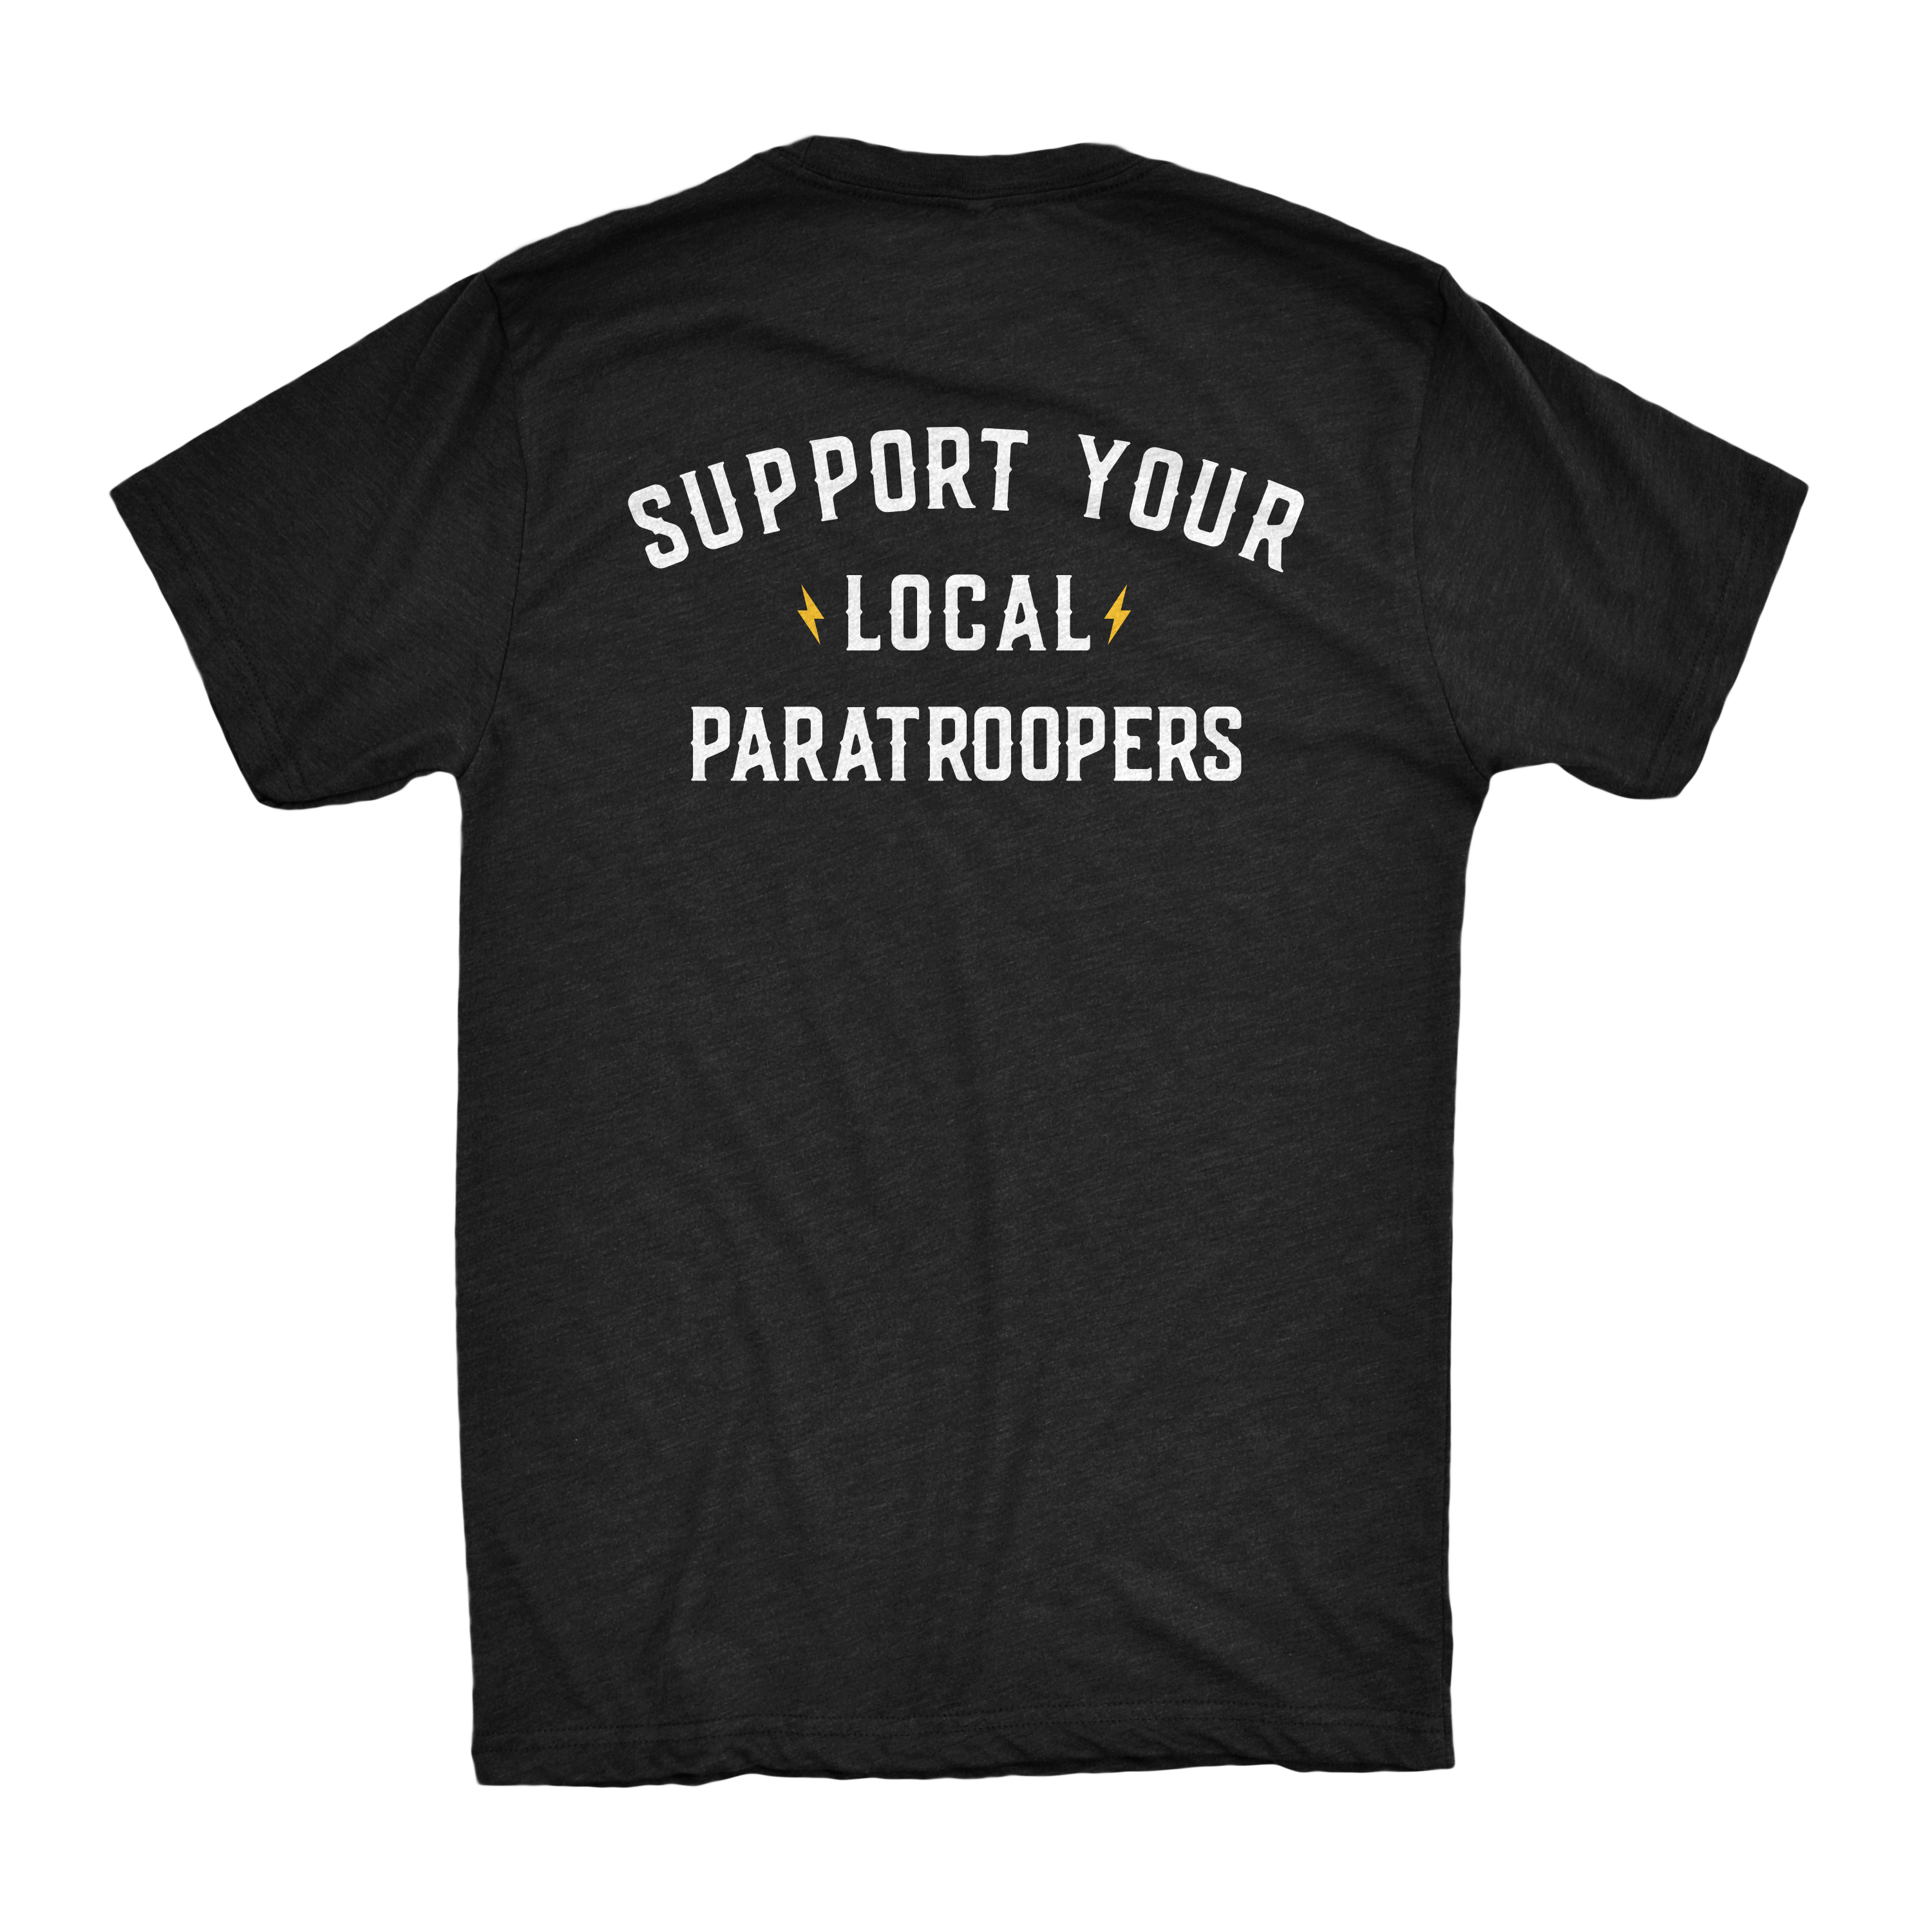 Support Your Local Paratroopers Shirt